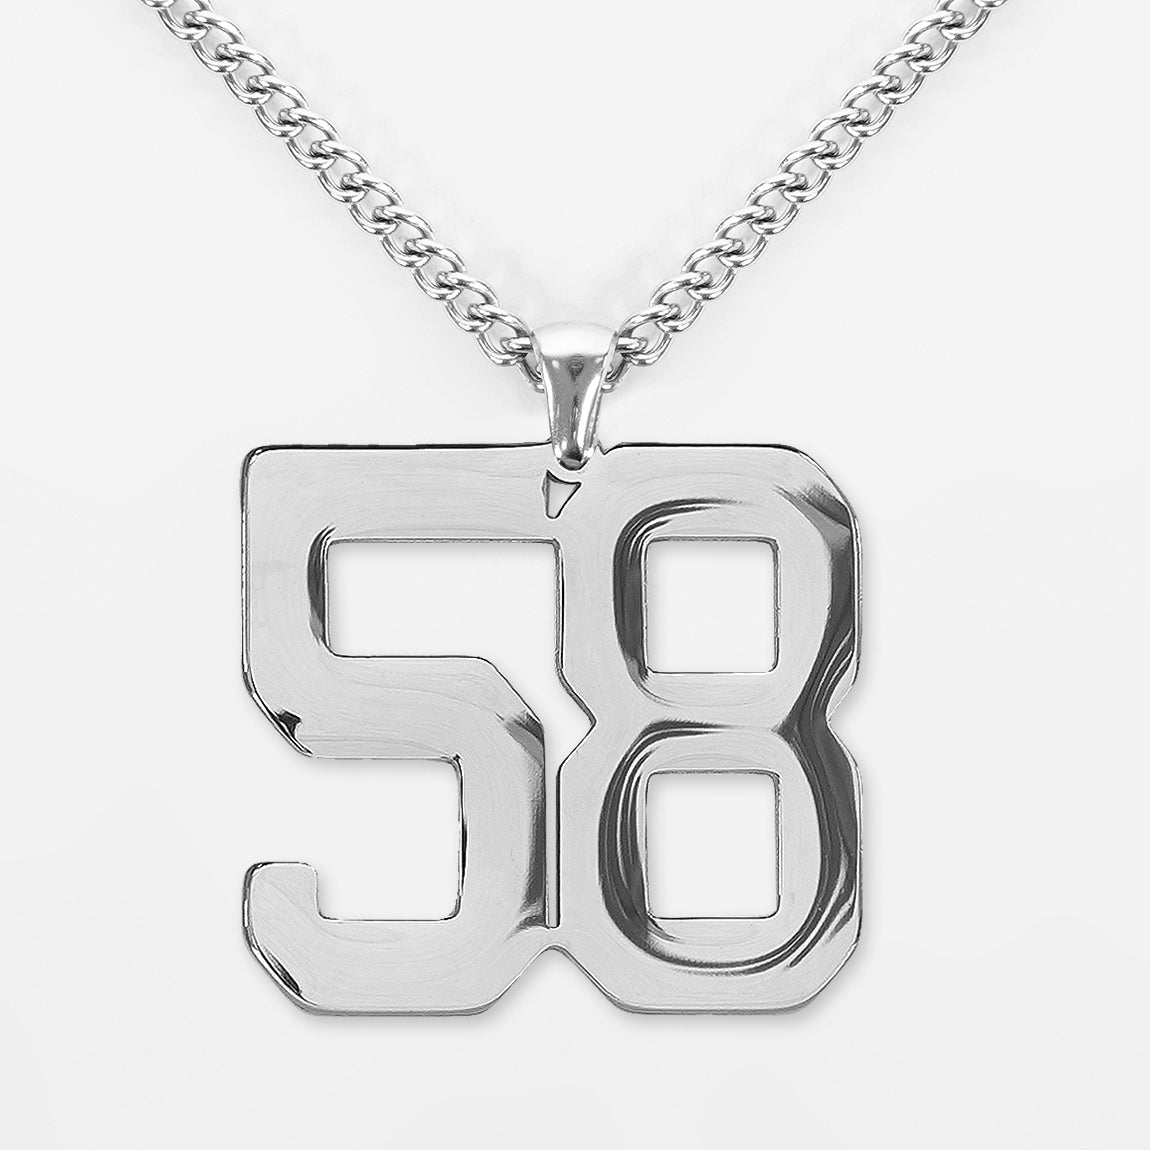 58 Number Pendant with Chain Necklace - Stainless Steel